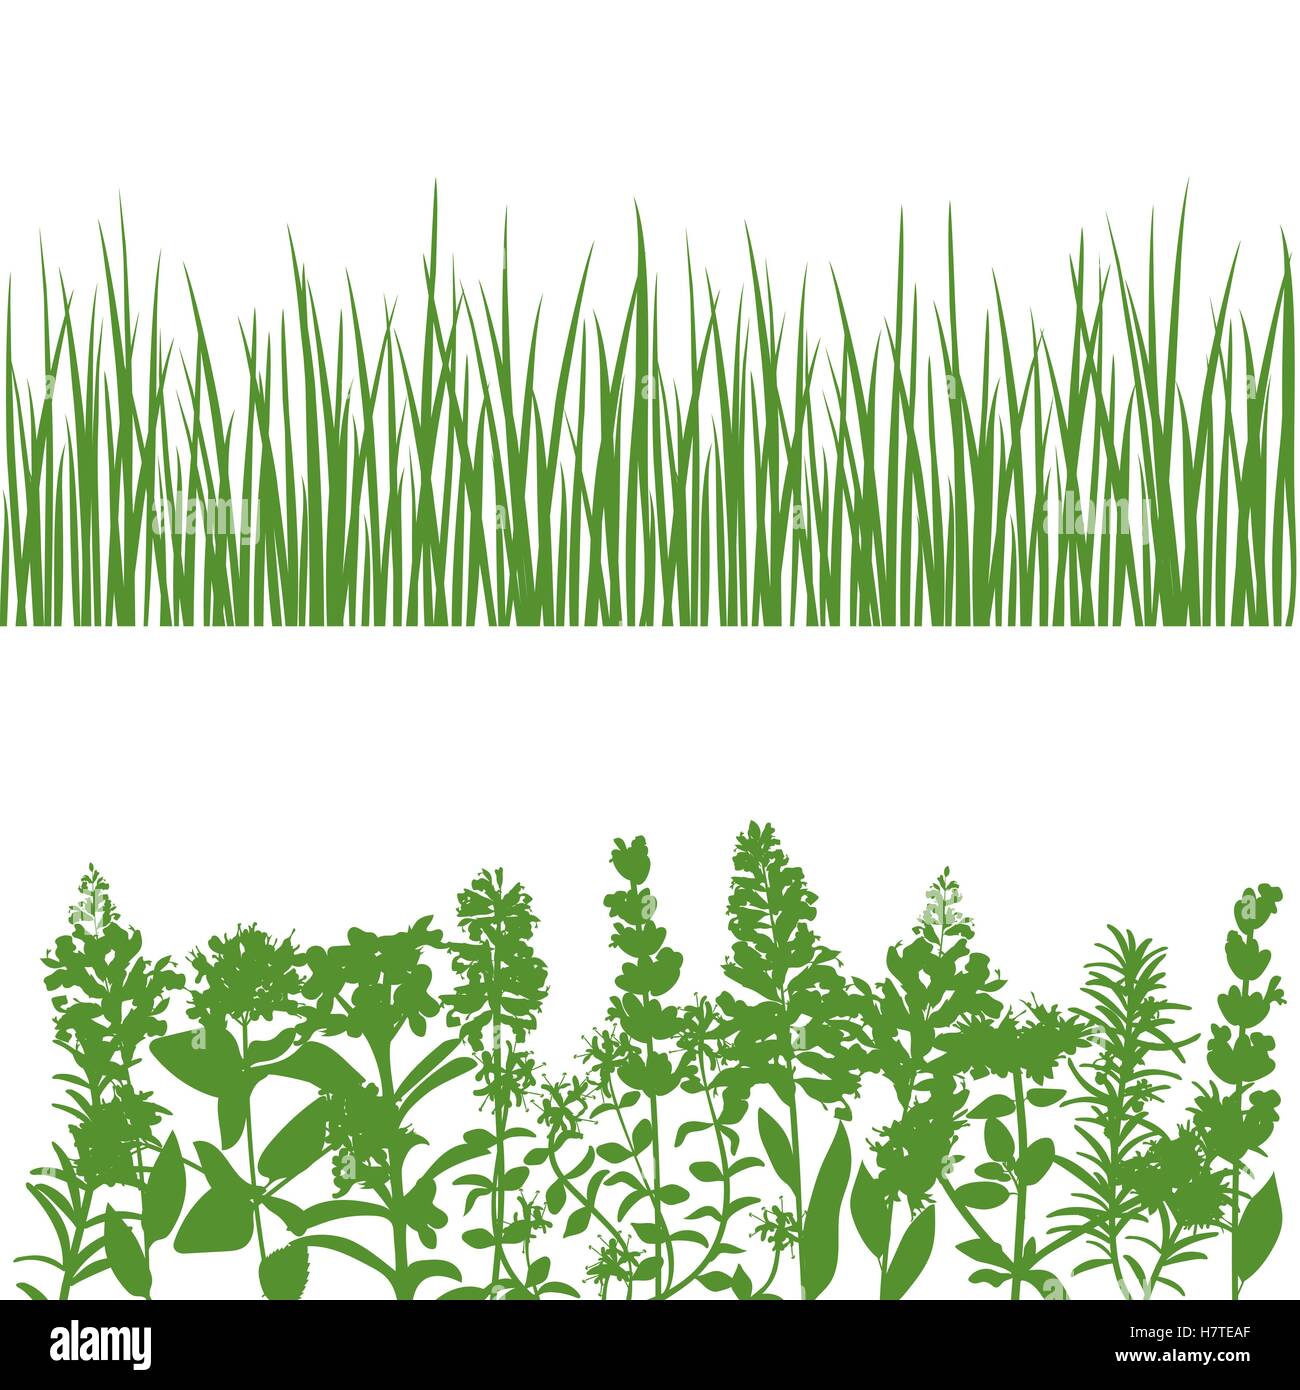 Grass and plants detailed silhouettes on white. Stock Vector